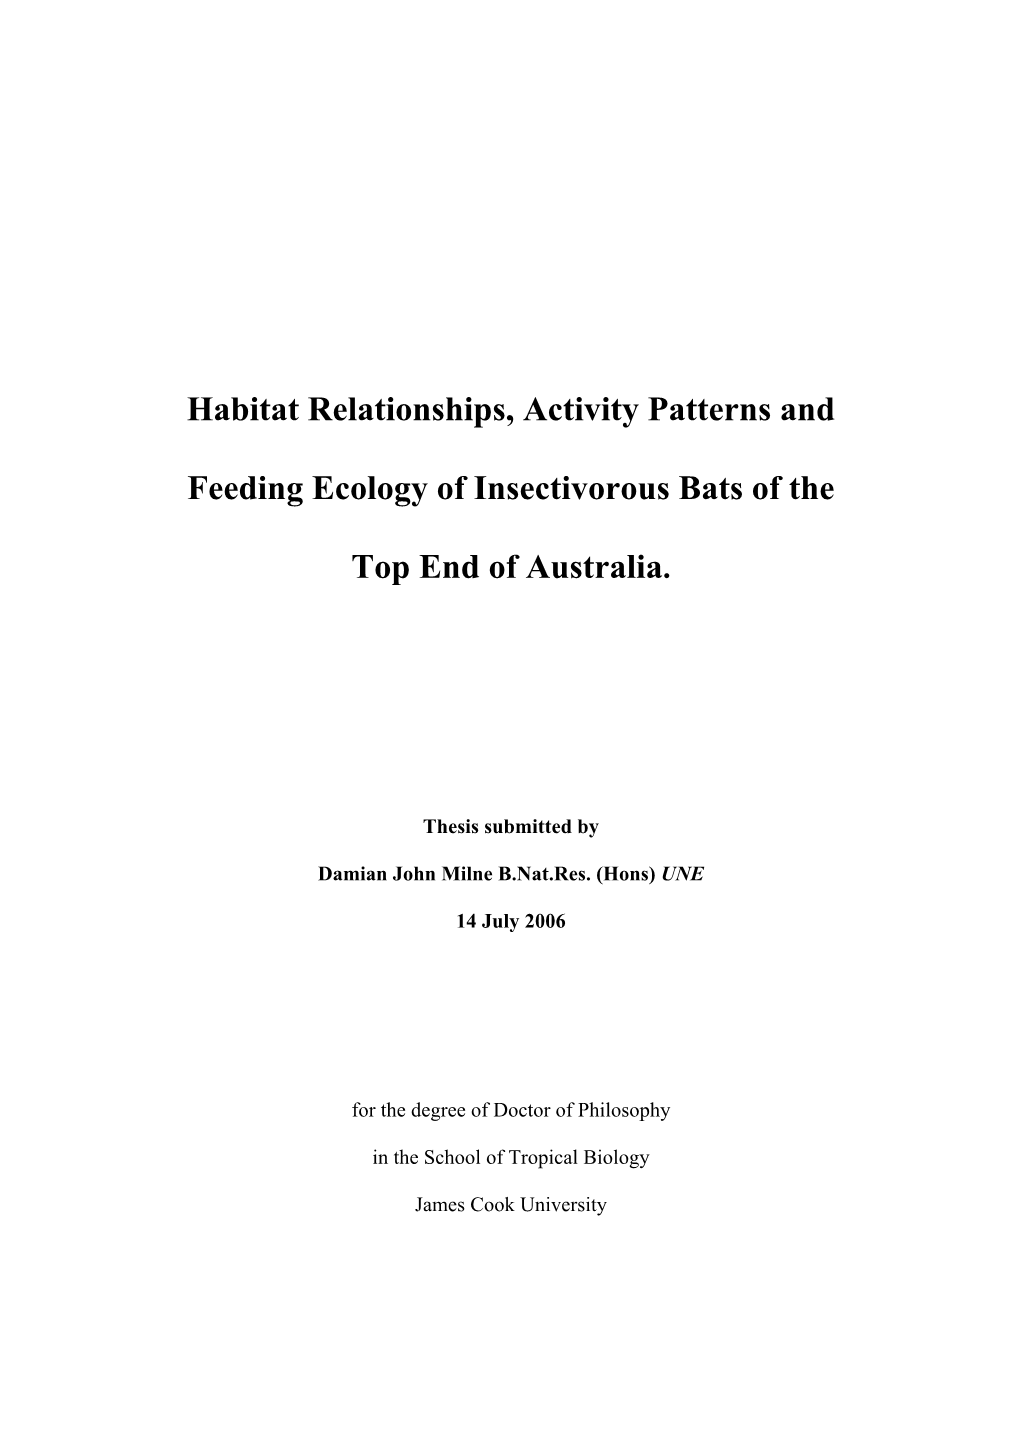 Habitat Relationships, Activity Patterns and Feeding Ecology of Insectivorous Bats of the Top End of Australia